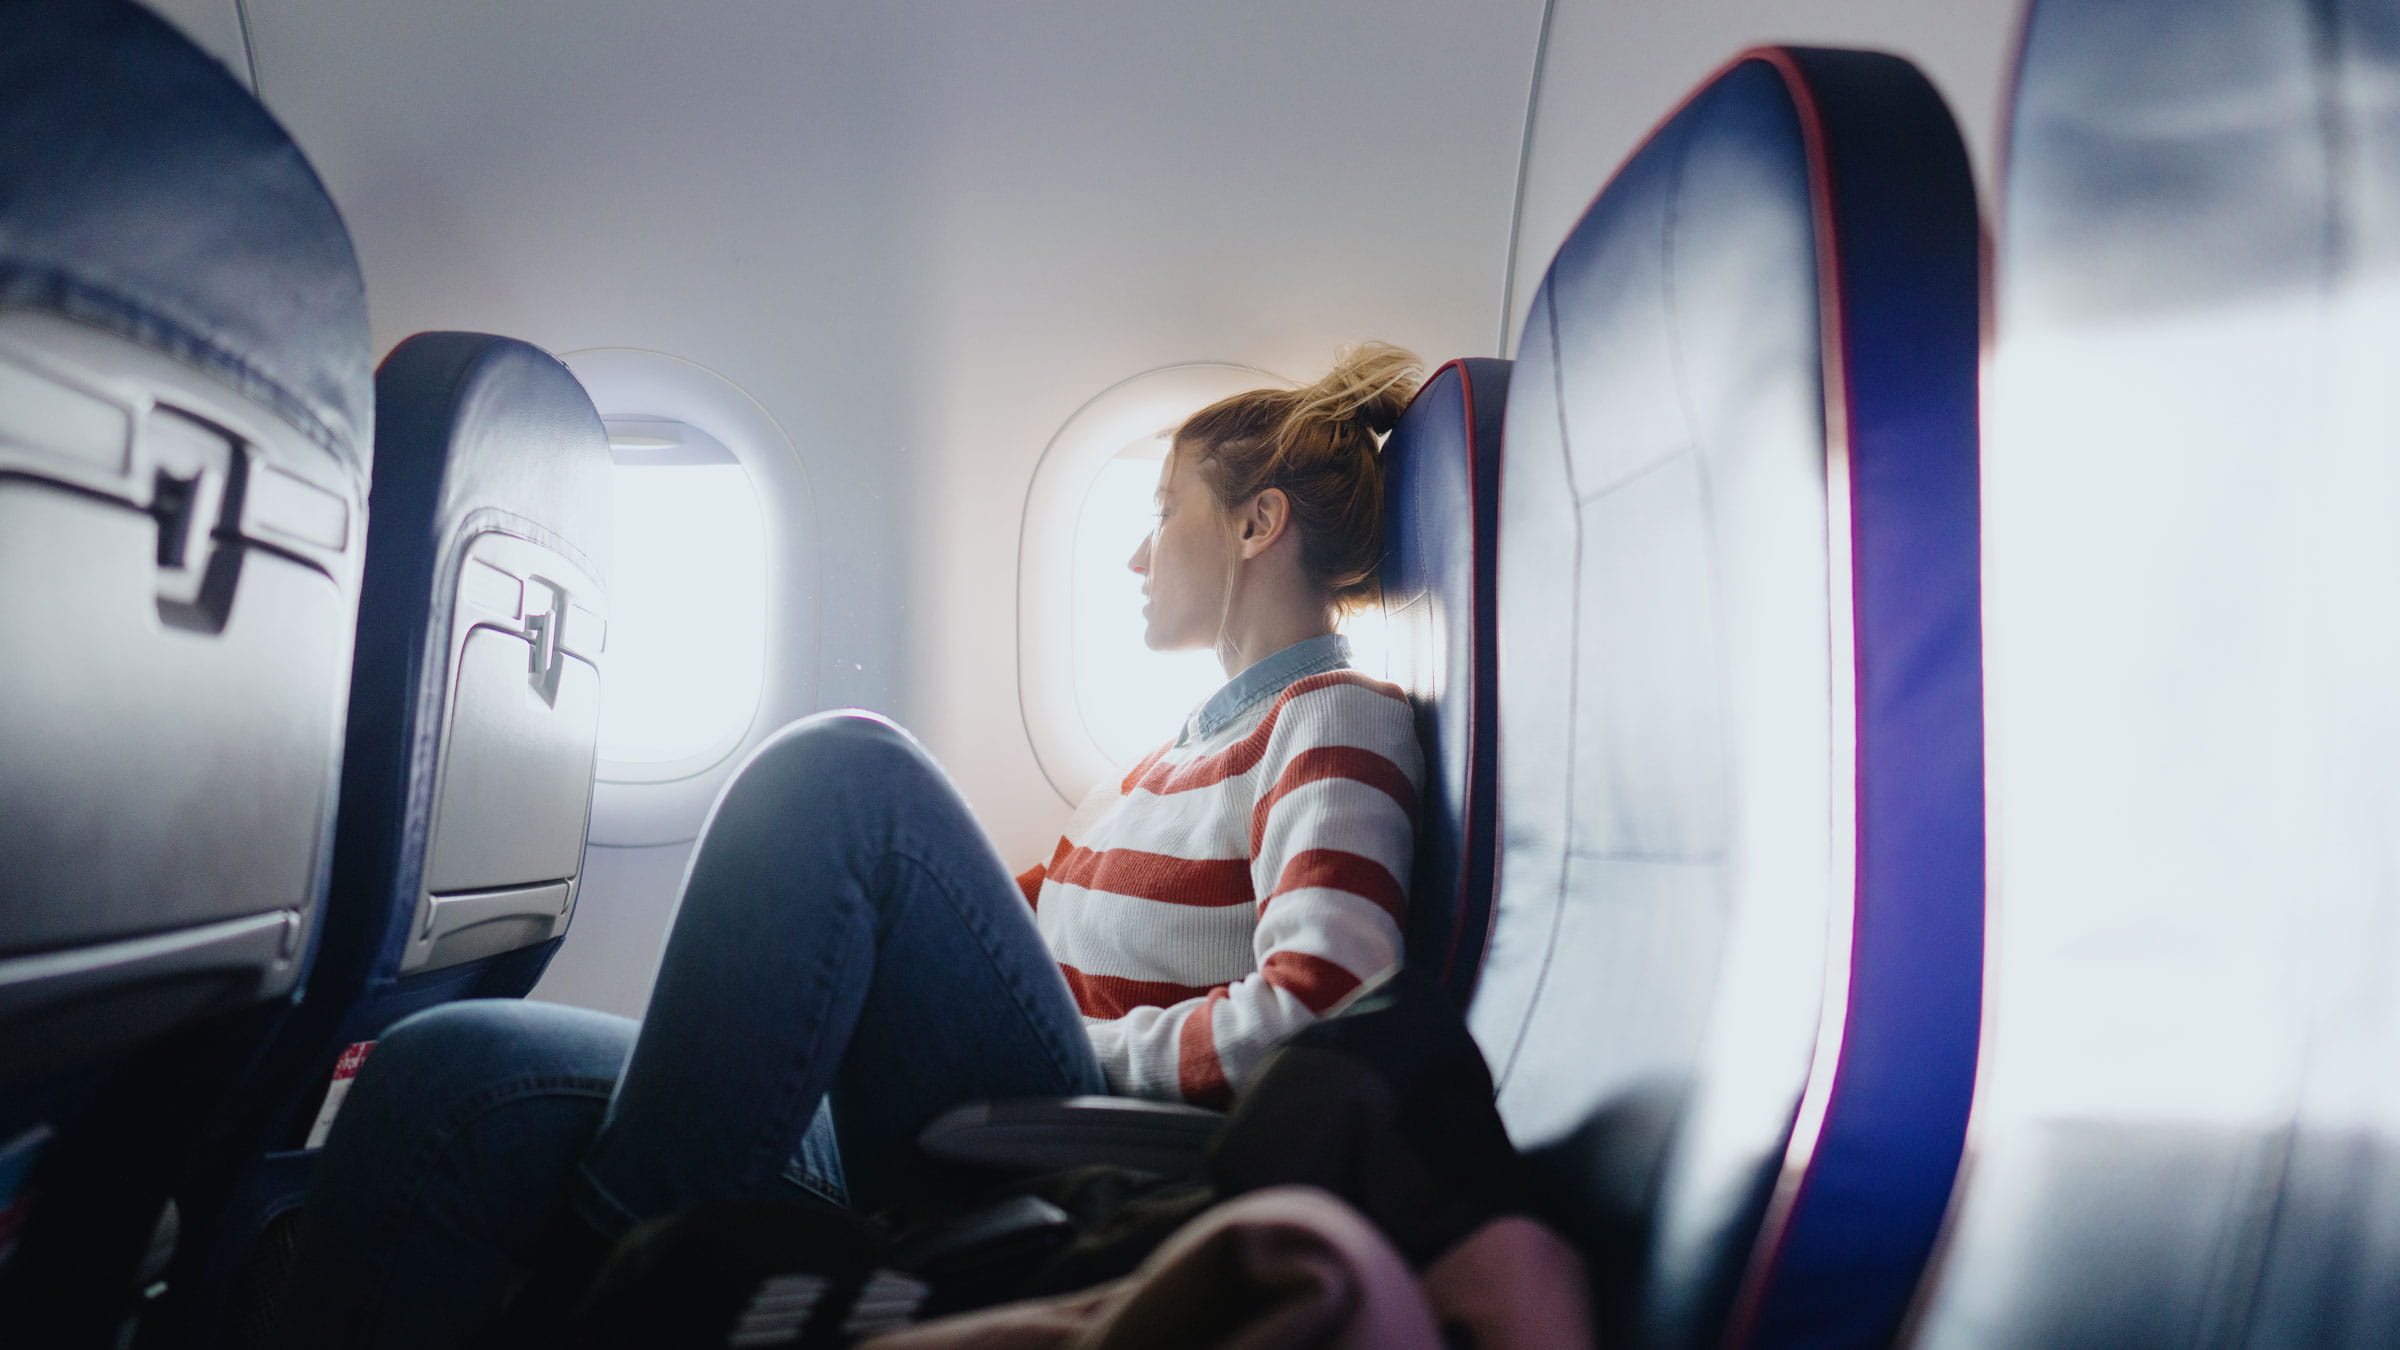 Young woman looking out the window of a plane